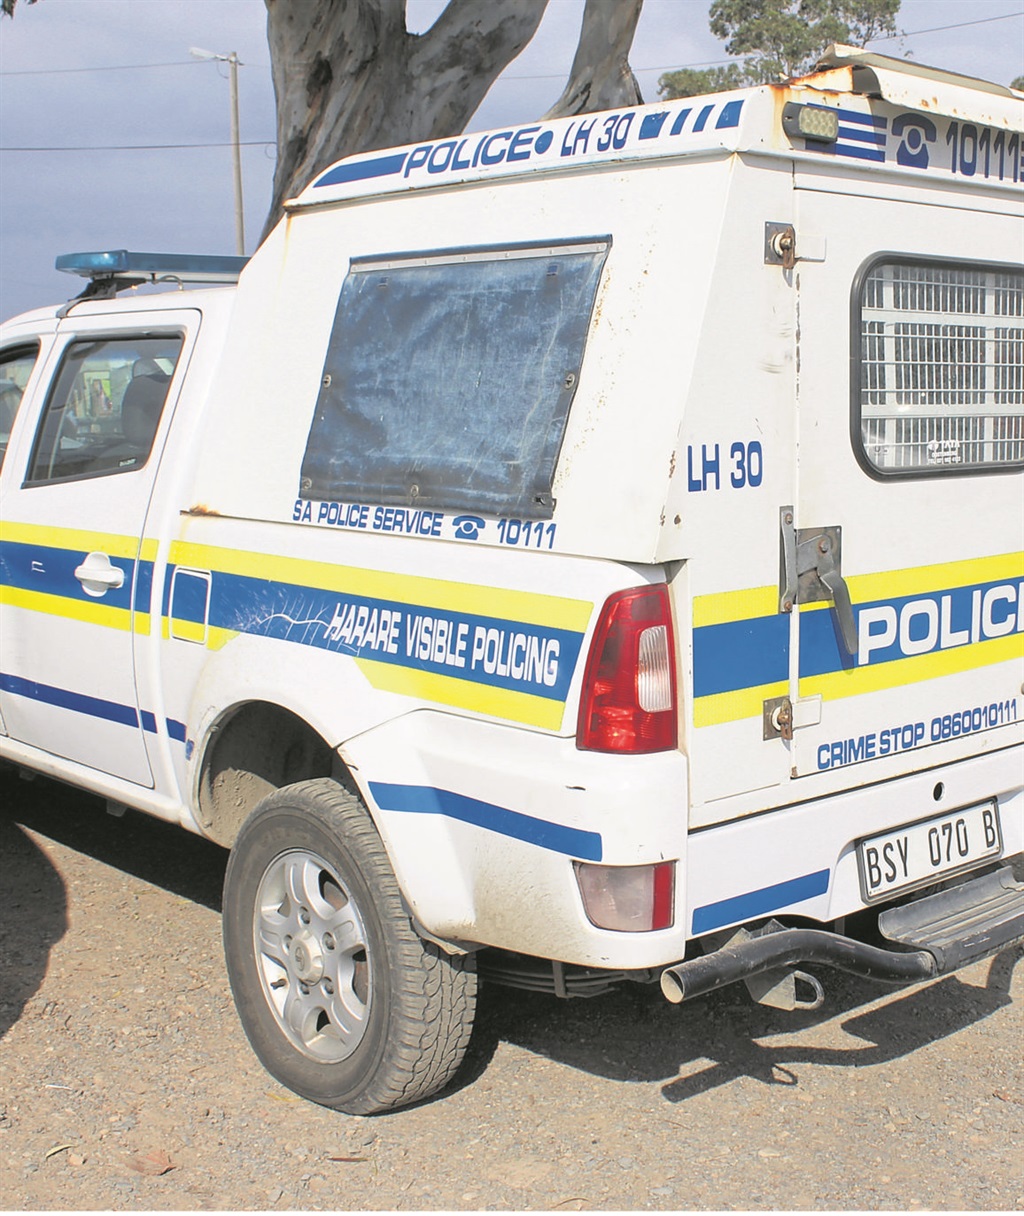 Lwandle Police Station borrowed this van from Harare cop shop. Photo by Velani Ludidi